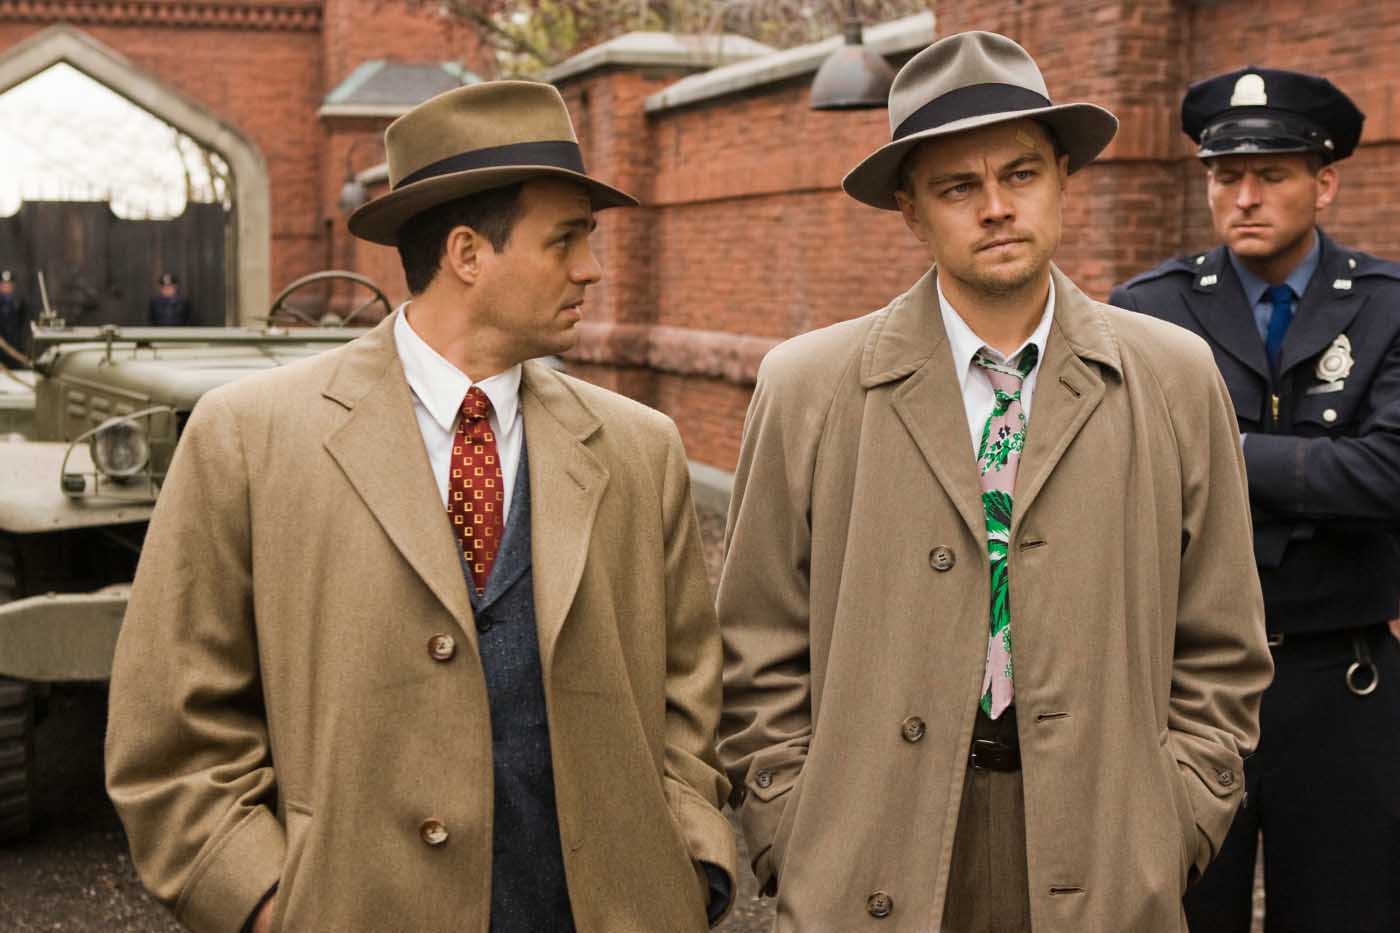 Shutter Island is one of the best movies of Leonardo DiCaprio